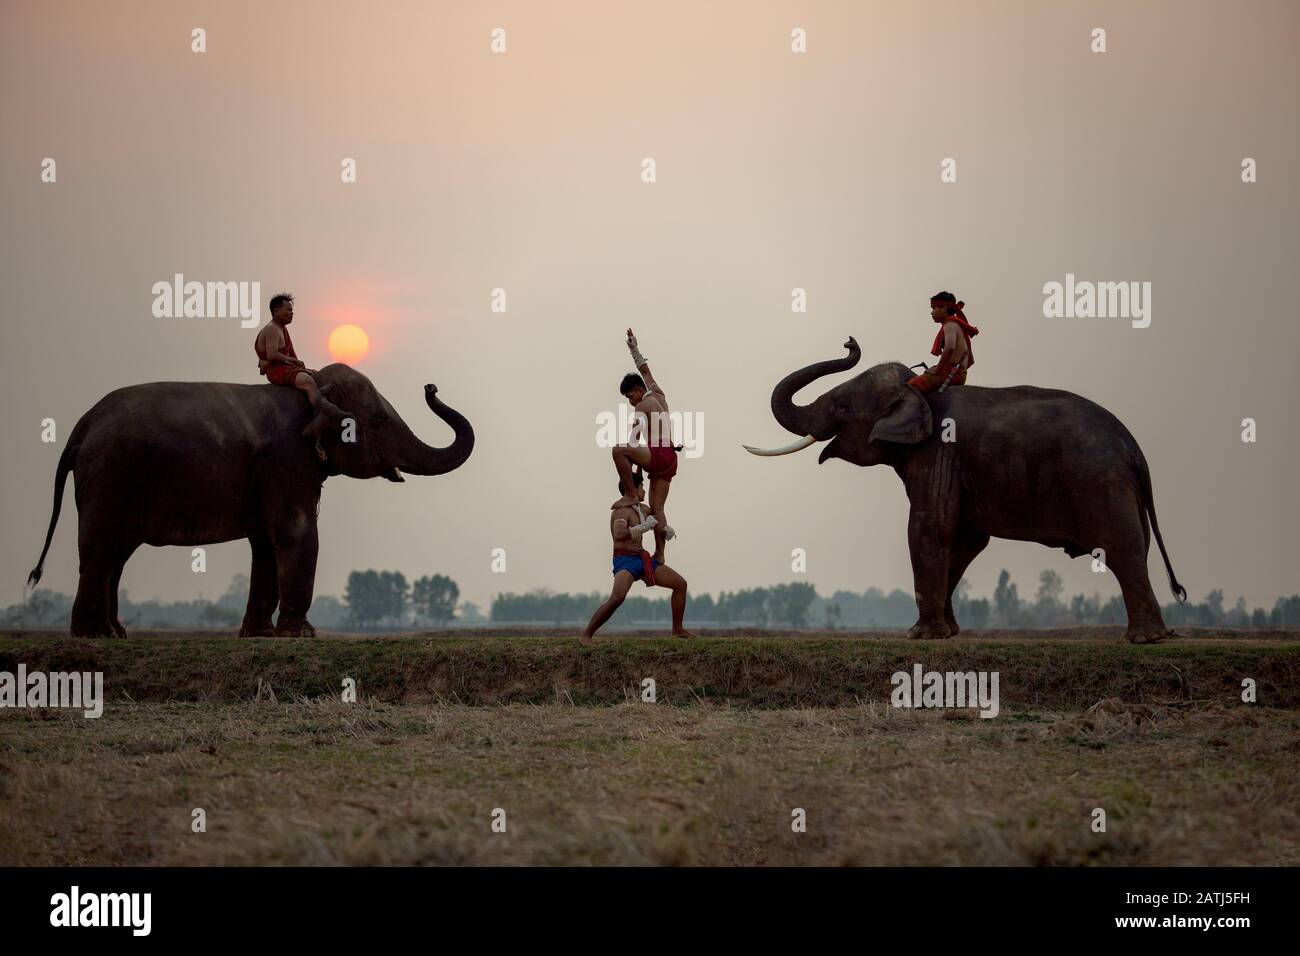 Muay Thai fighting and mahout elephants and this is the traditional culture in Chang Village Surin Thailand. Stock Photo